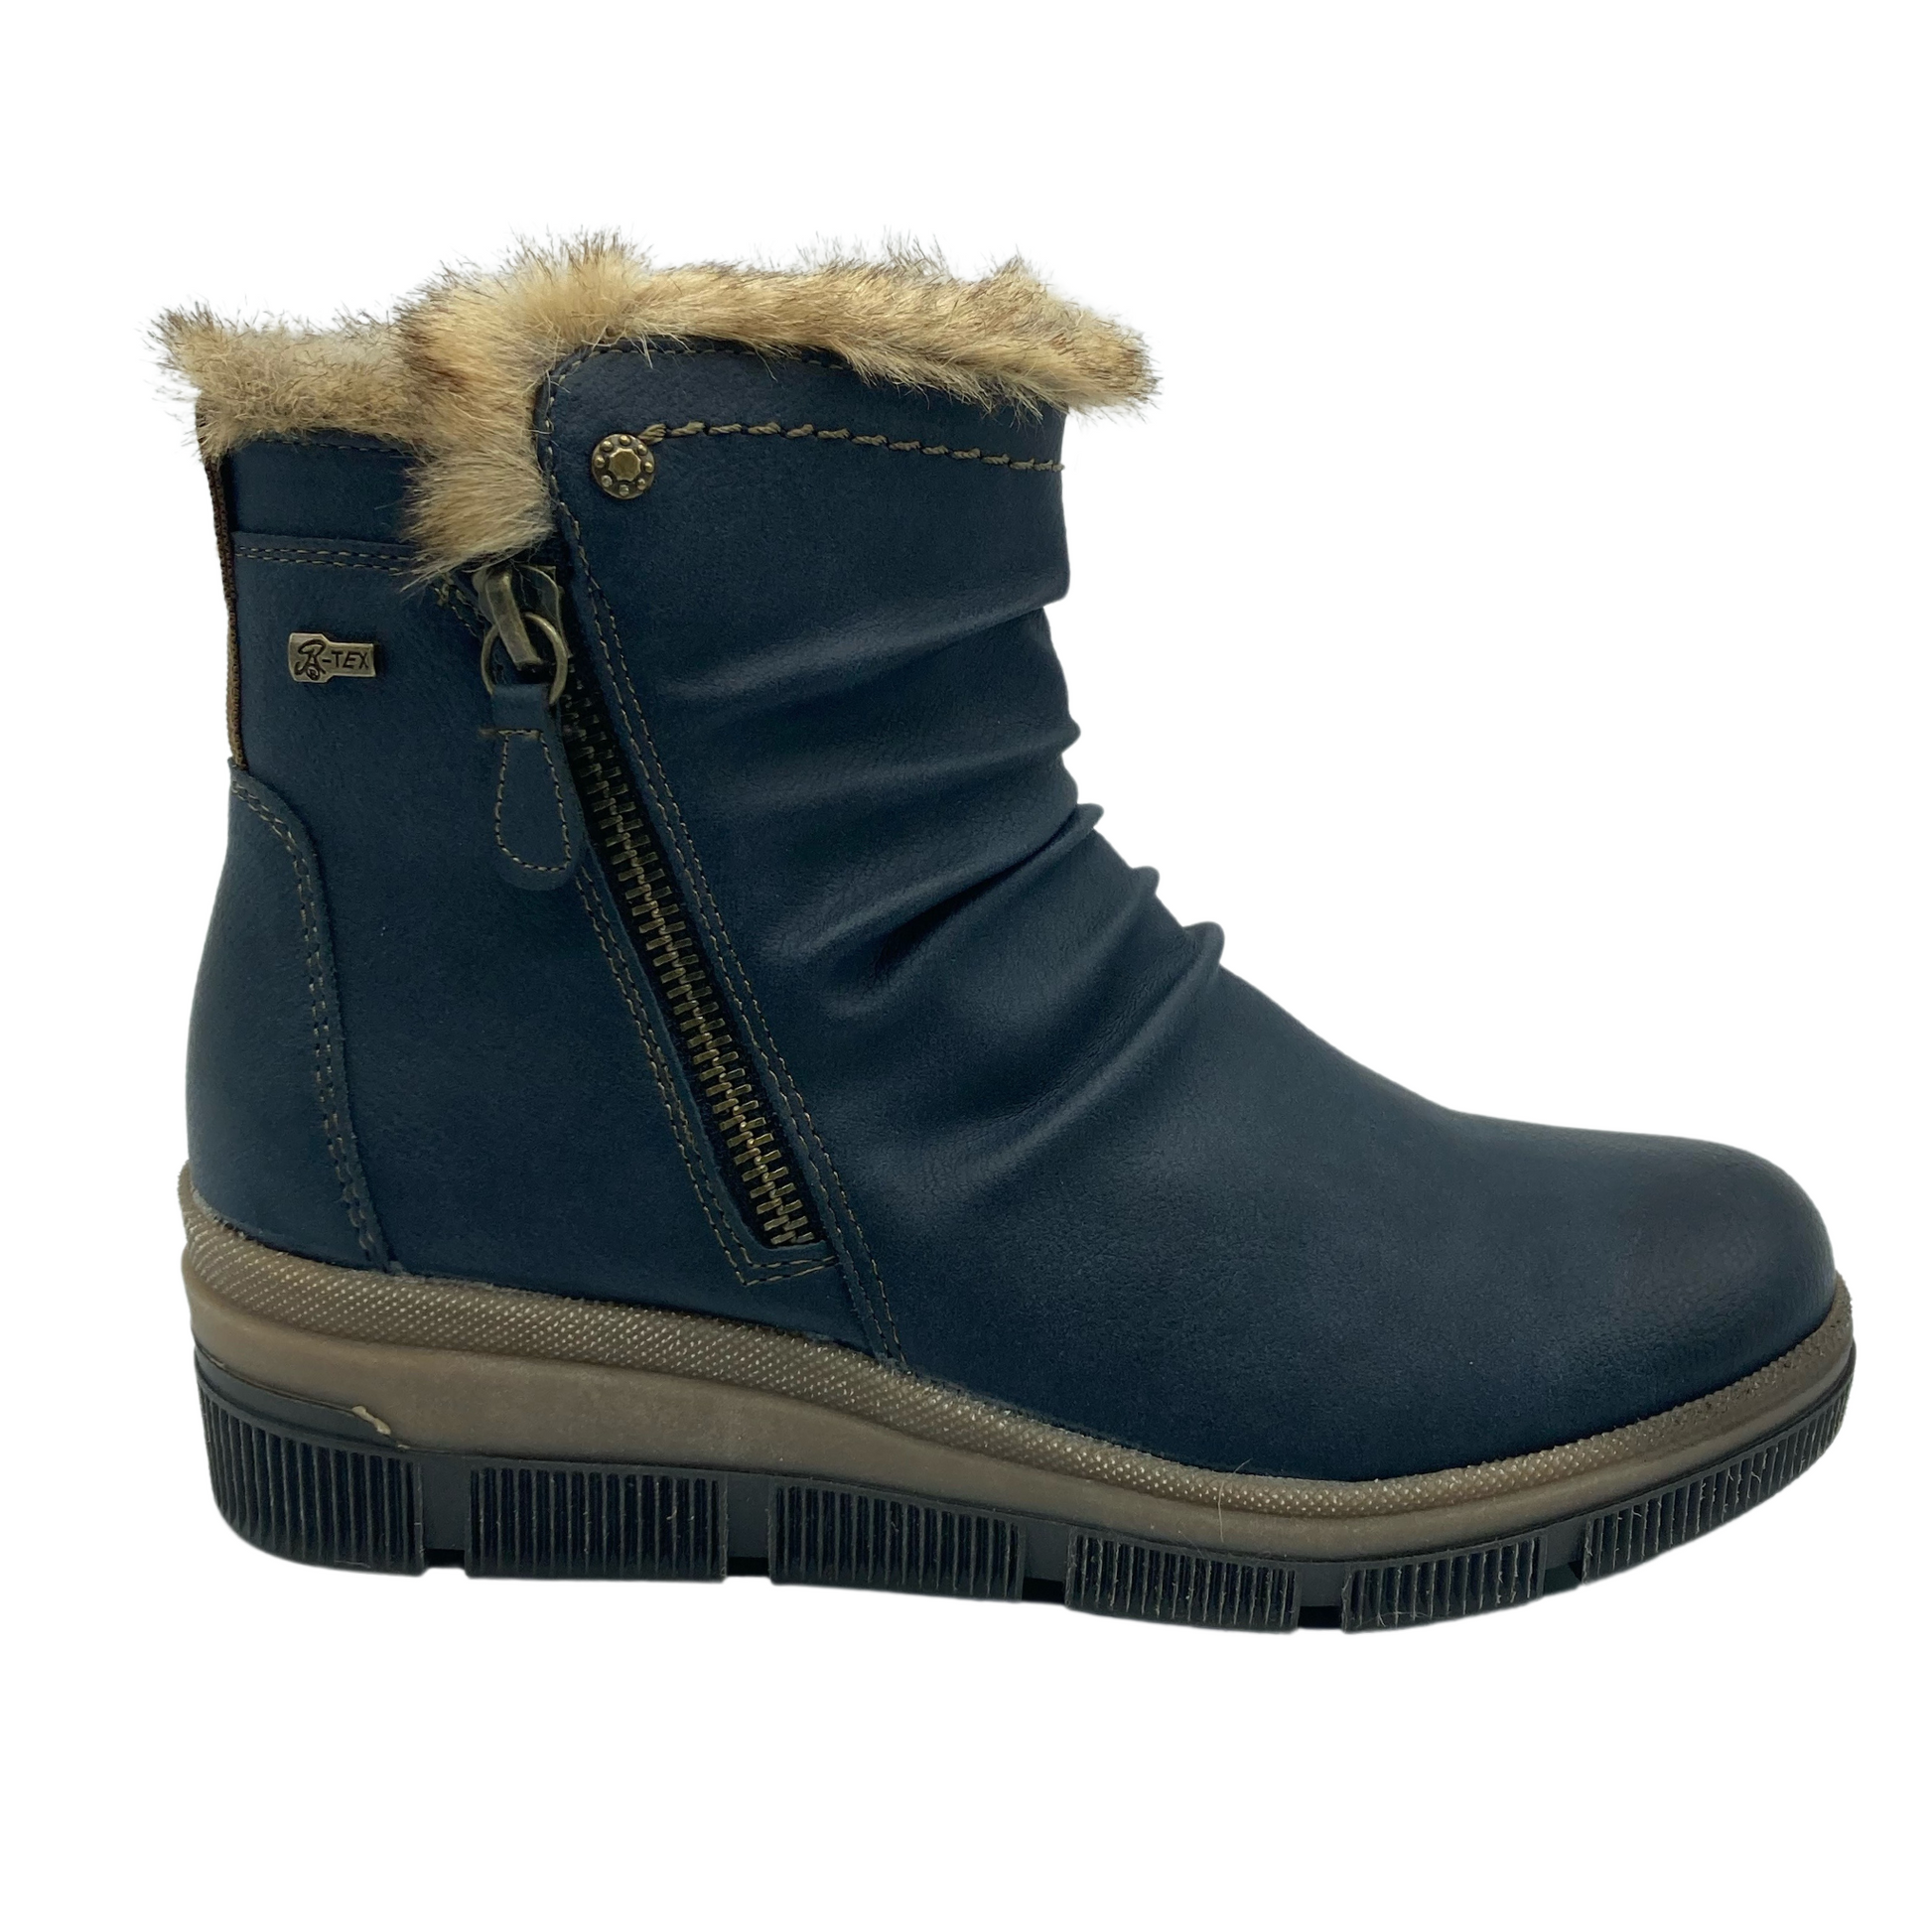 Right facing view of blue vegan leather bootie with faux fur lining, side zipper closure and wedge sole